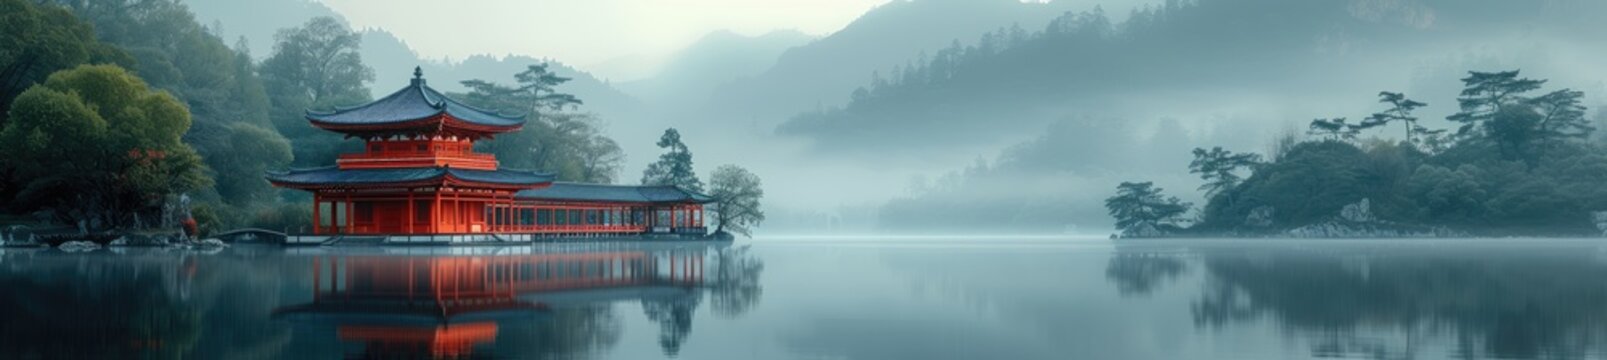 a tranquil pagoda on a mist-covered lake, capturing the essence of Asian serenity